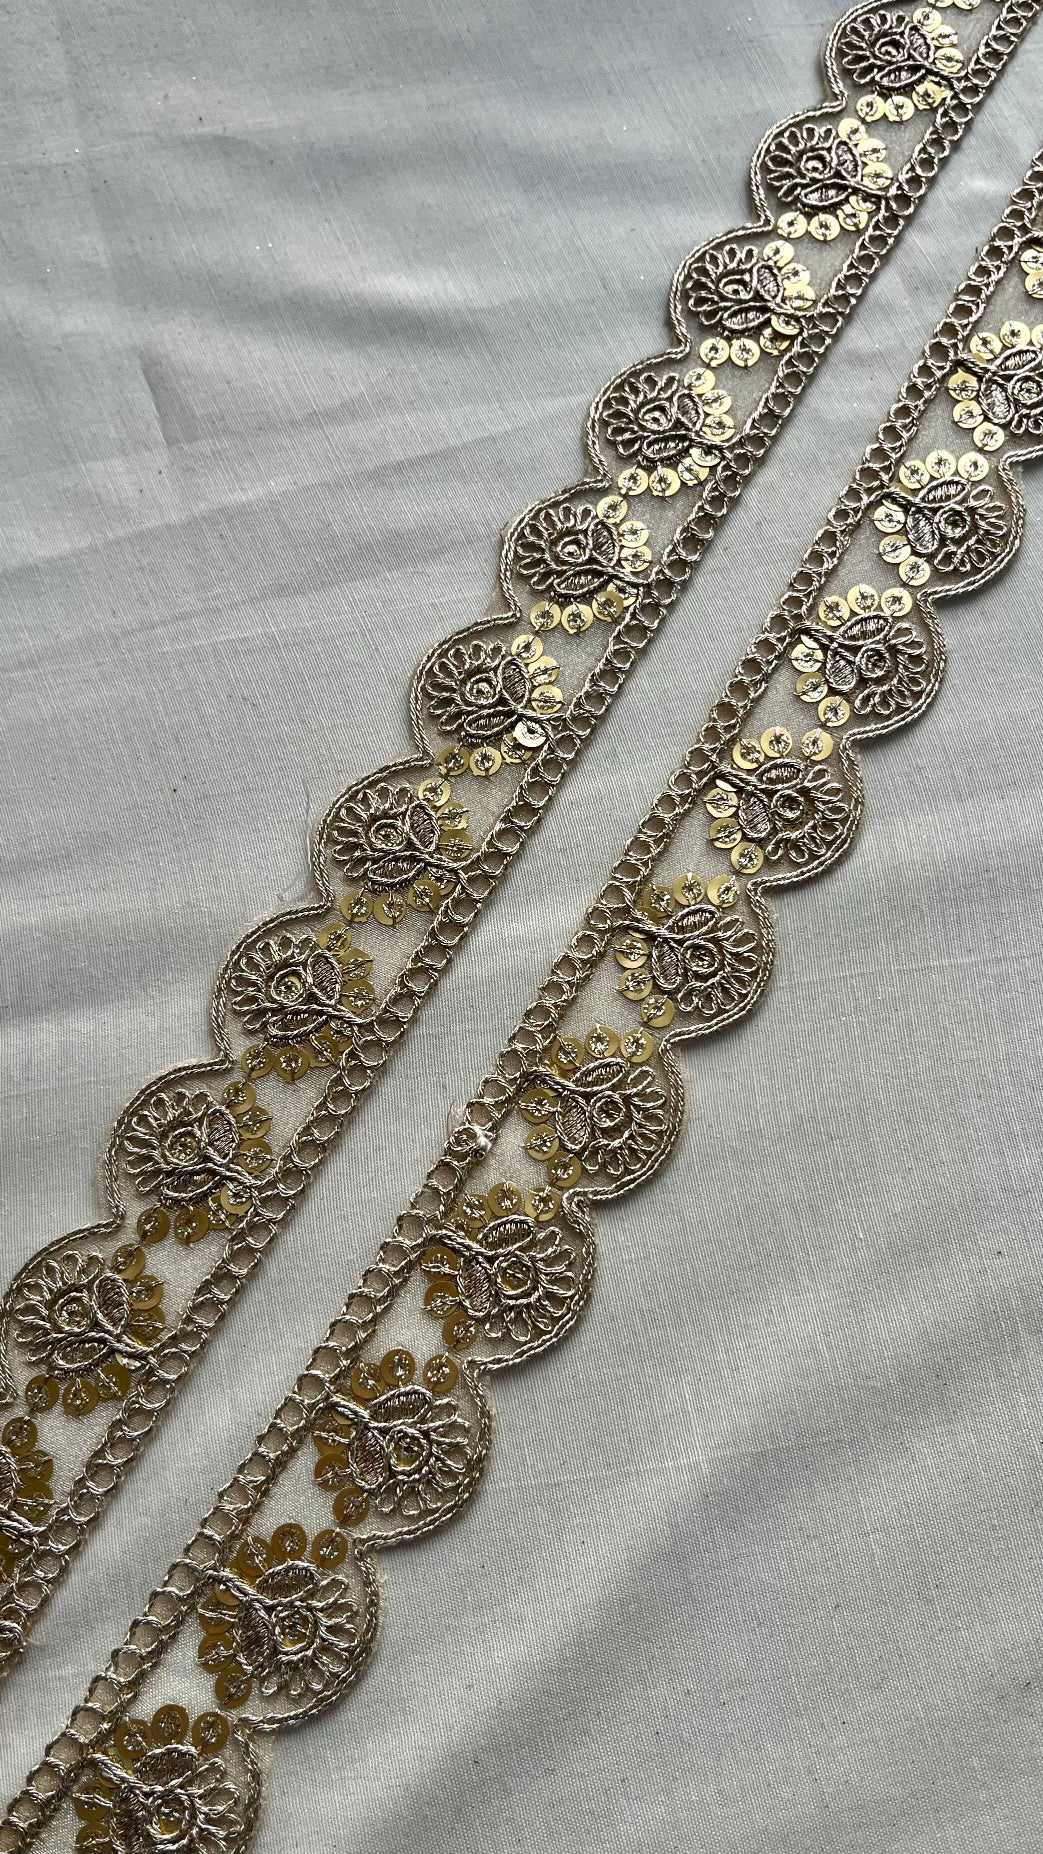 Floral Zari Work With Gold Sequins Embroidered Scallop Lace (9 Meters)